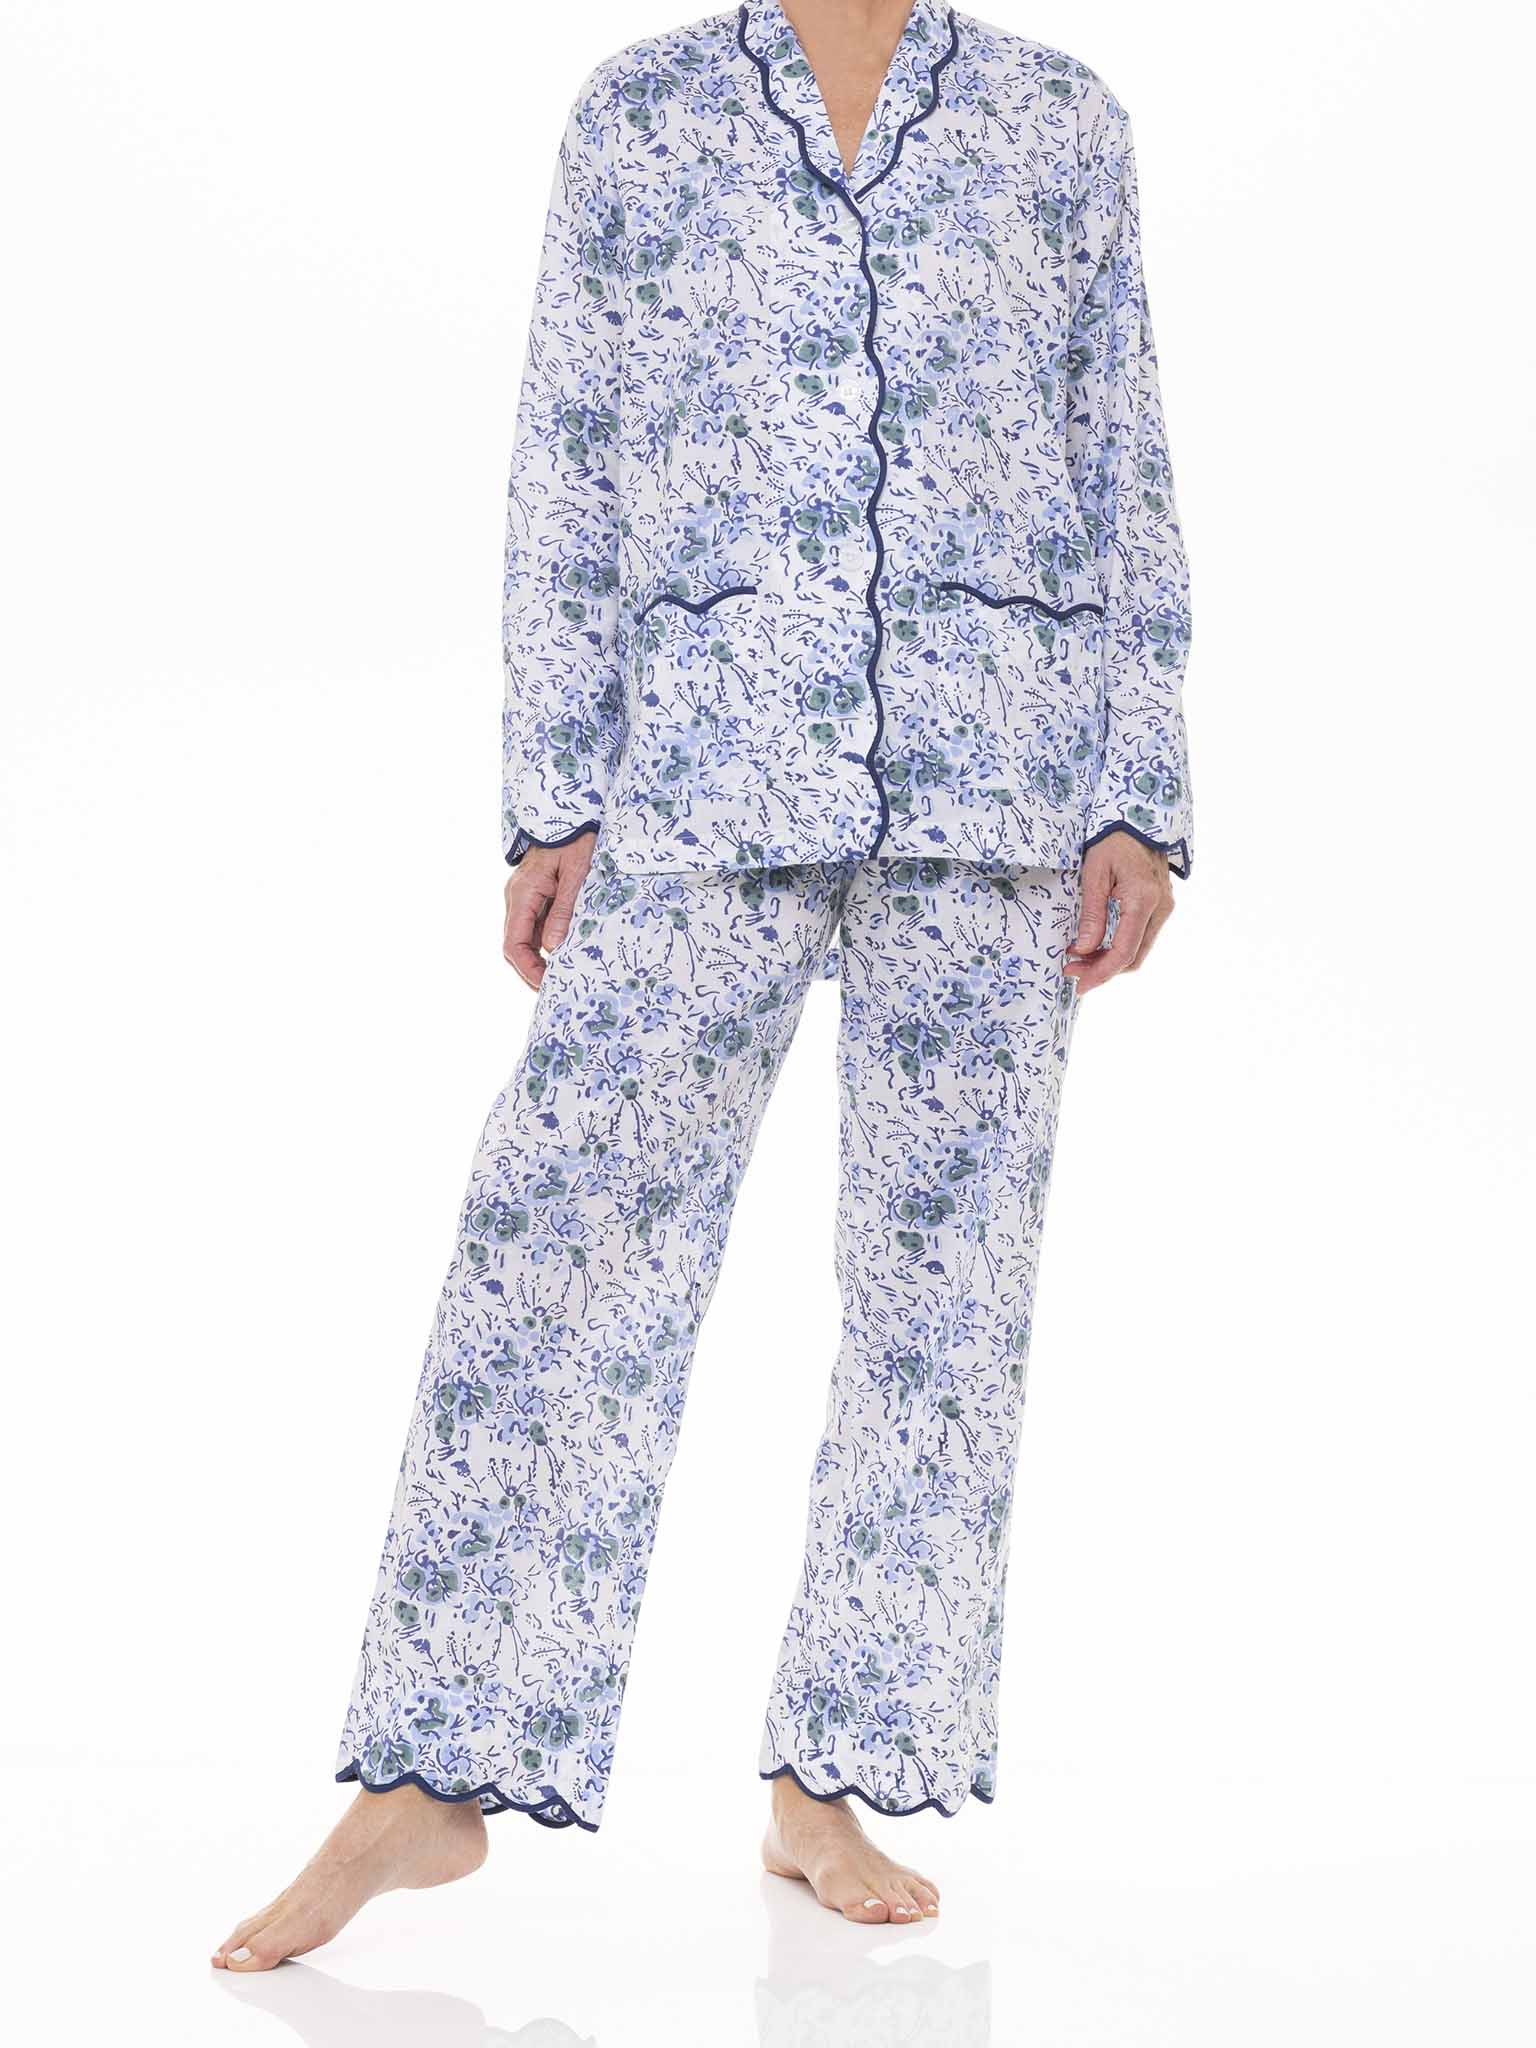 cute pajama sets, aesthetic pajamas, cozy, comfy sets, floral sets, gingham pattern